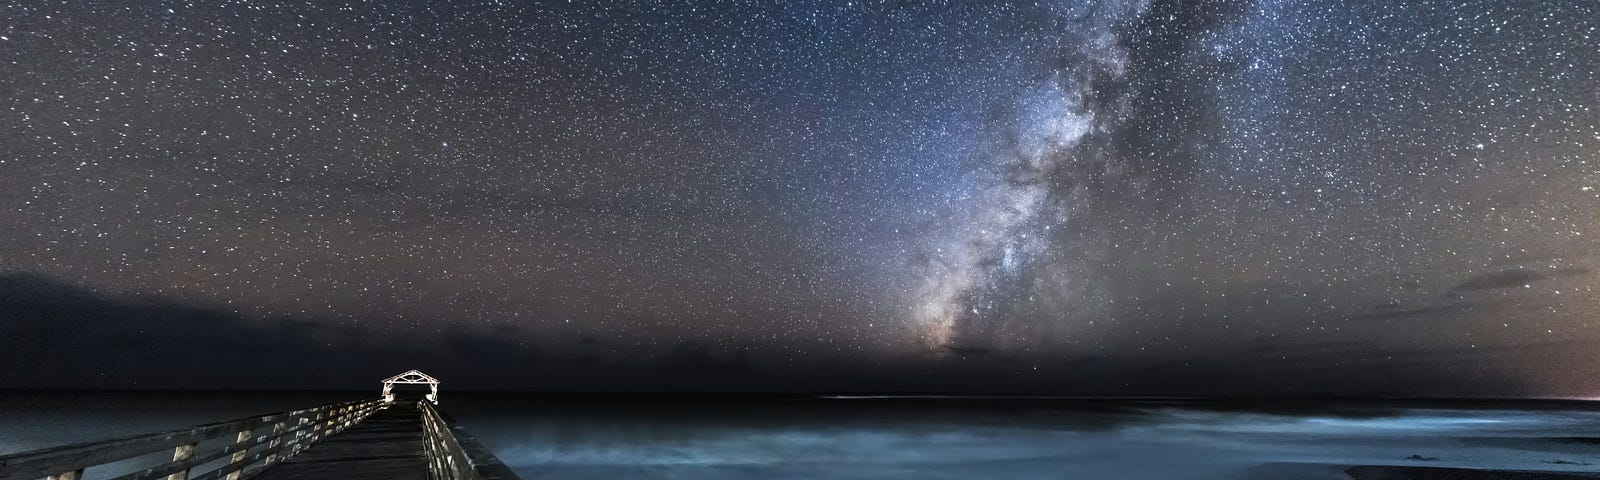 The Milky Way and stars dominate the night sky above a lake, with a pier in the foreground.